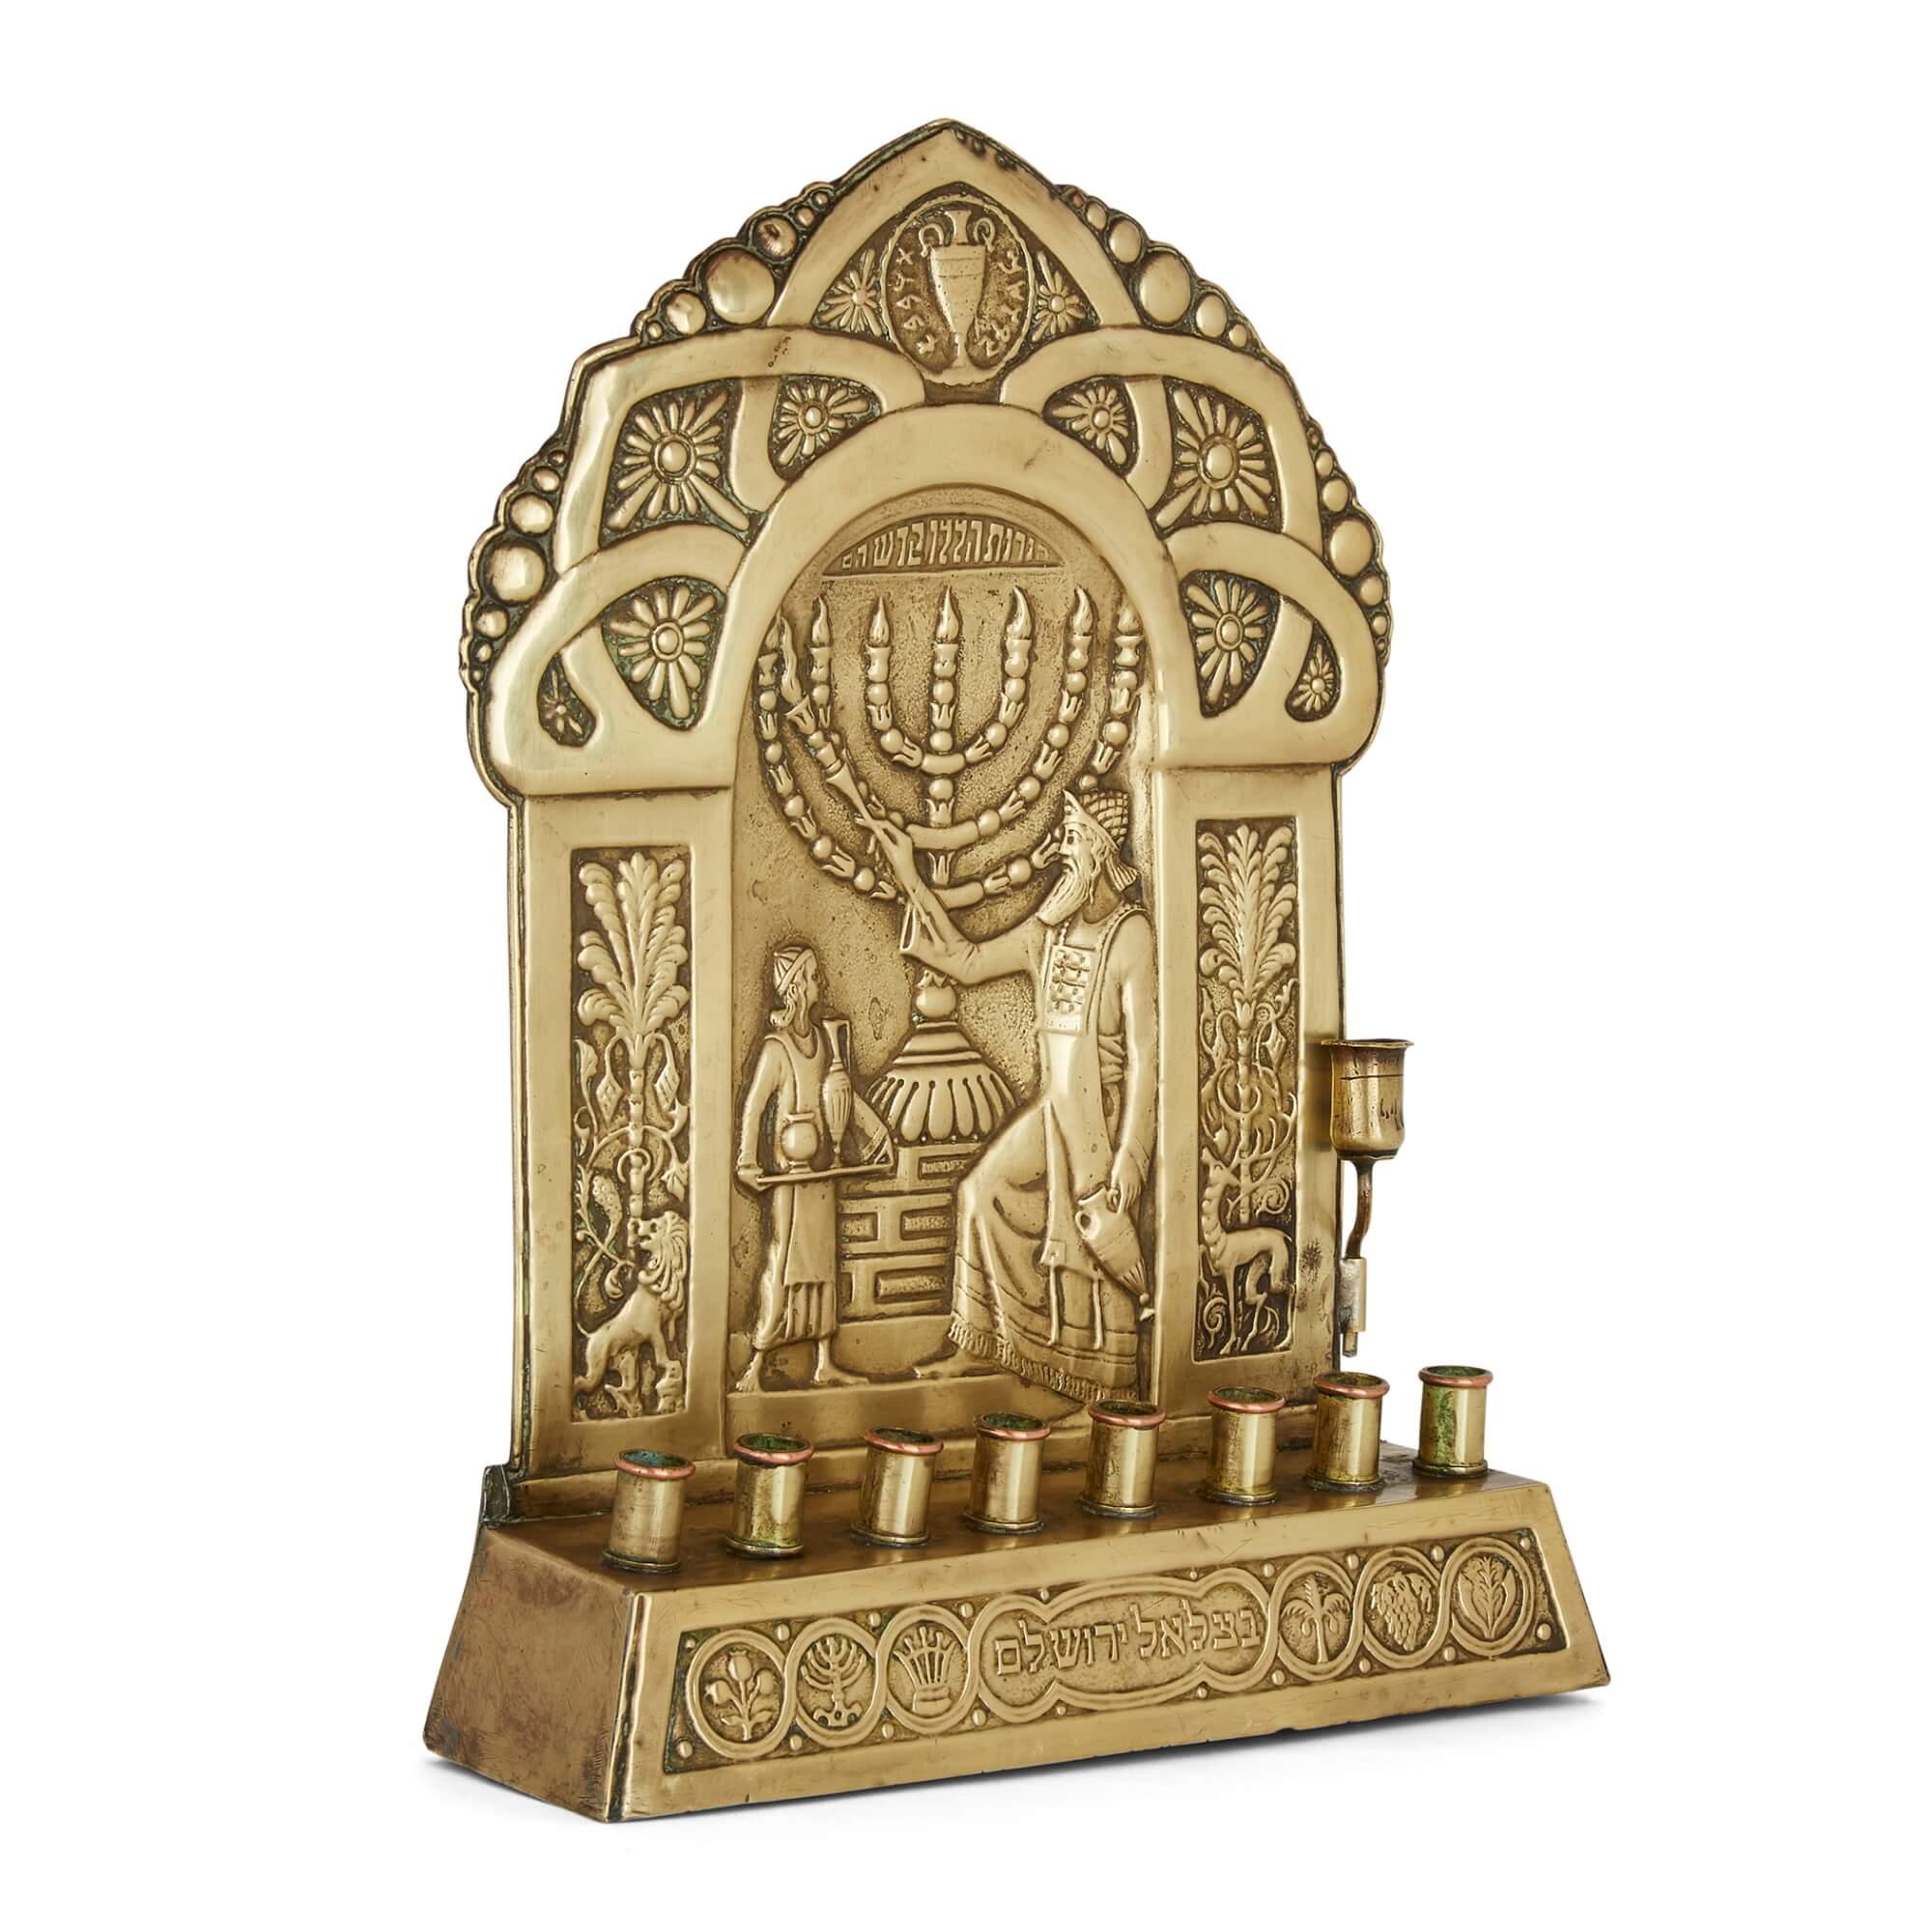 An early 20th century antique brass Judaica Menorah by the Bezalel Academy, Jerusalem
Israel, c.1930
Measures: 28cm high x 20cm wide x 5.5cm deep

Made by the renowned and acclaimed Bezalel Academy in Jerusalem, Israel's pre-eminent school of